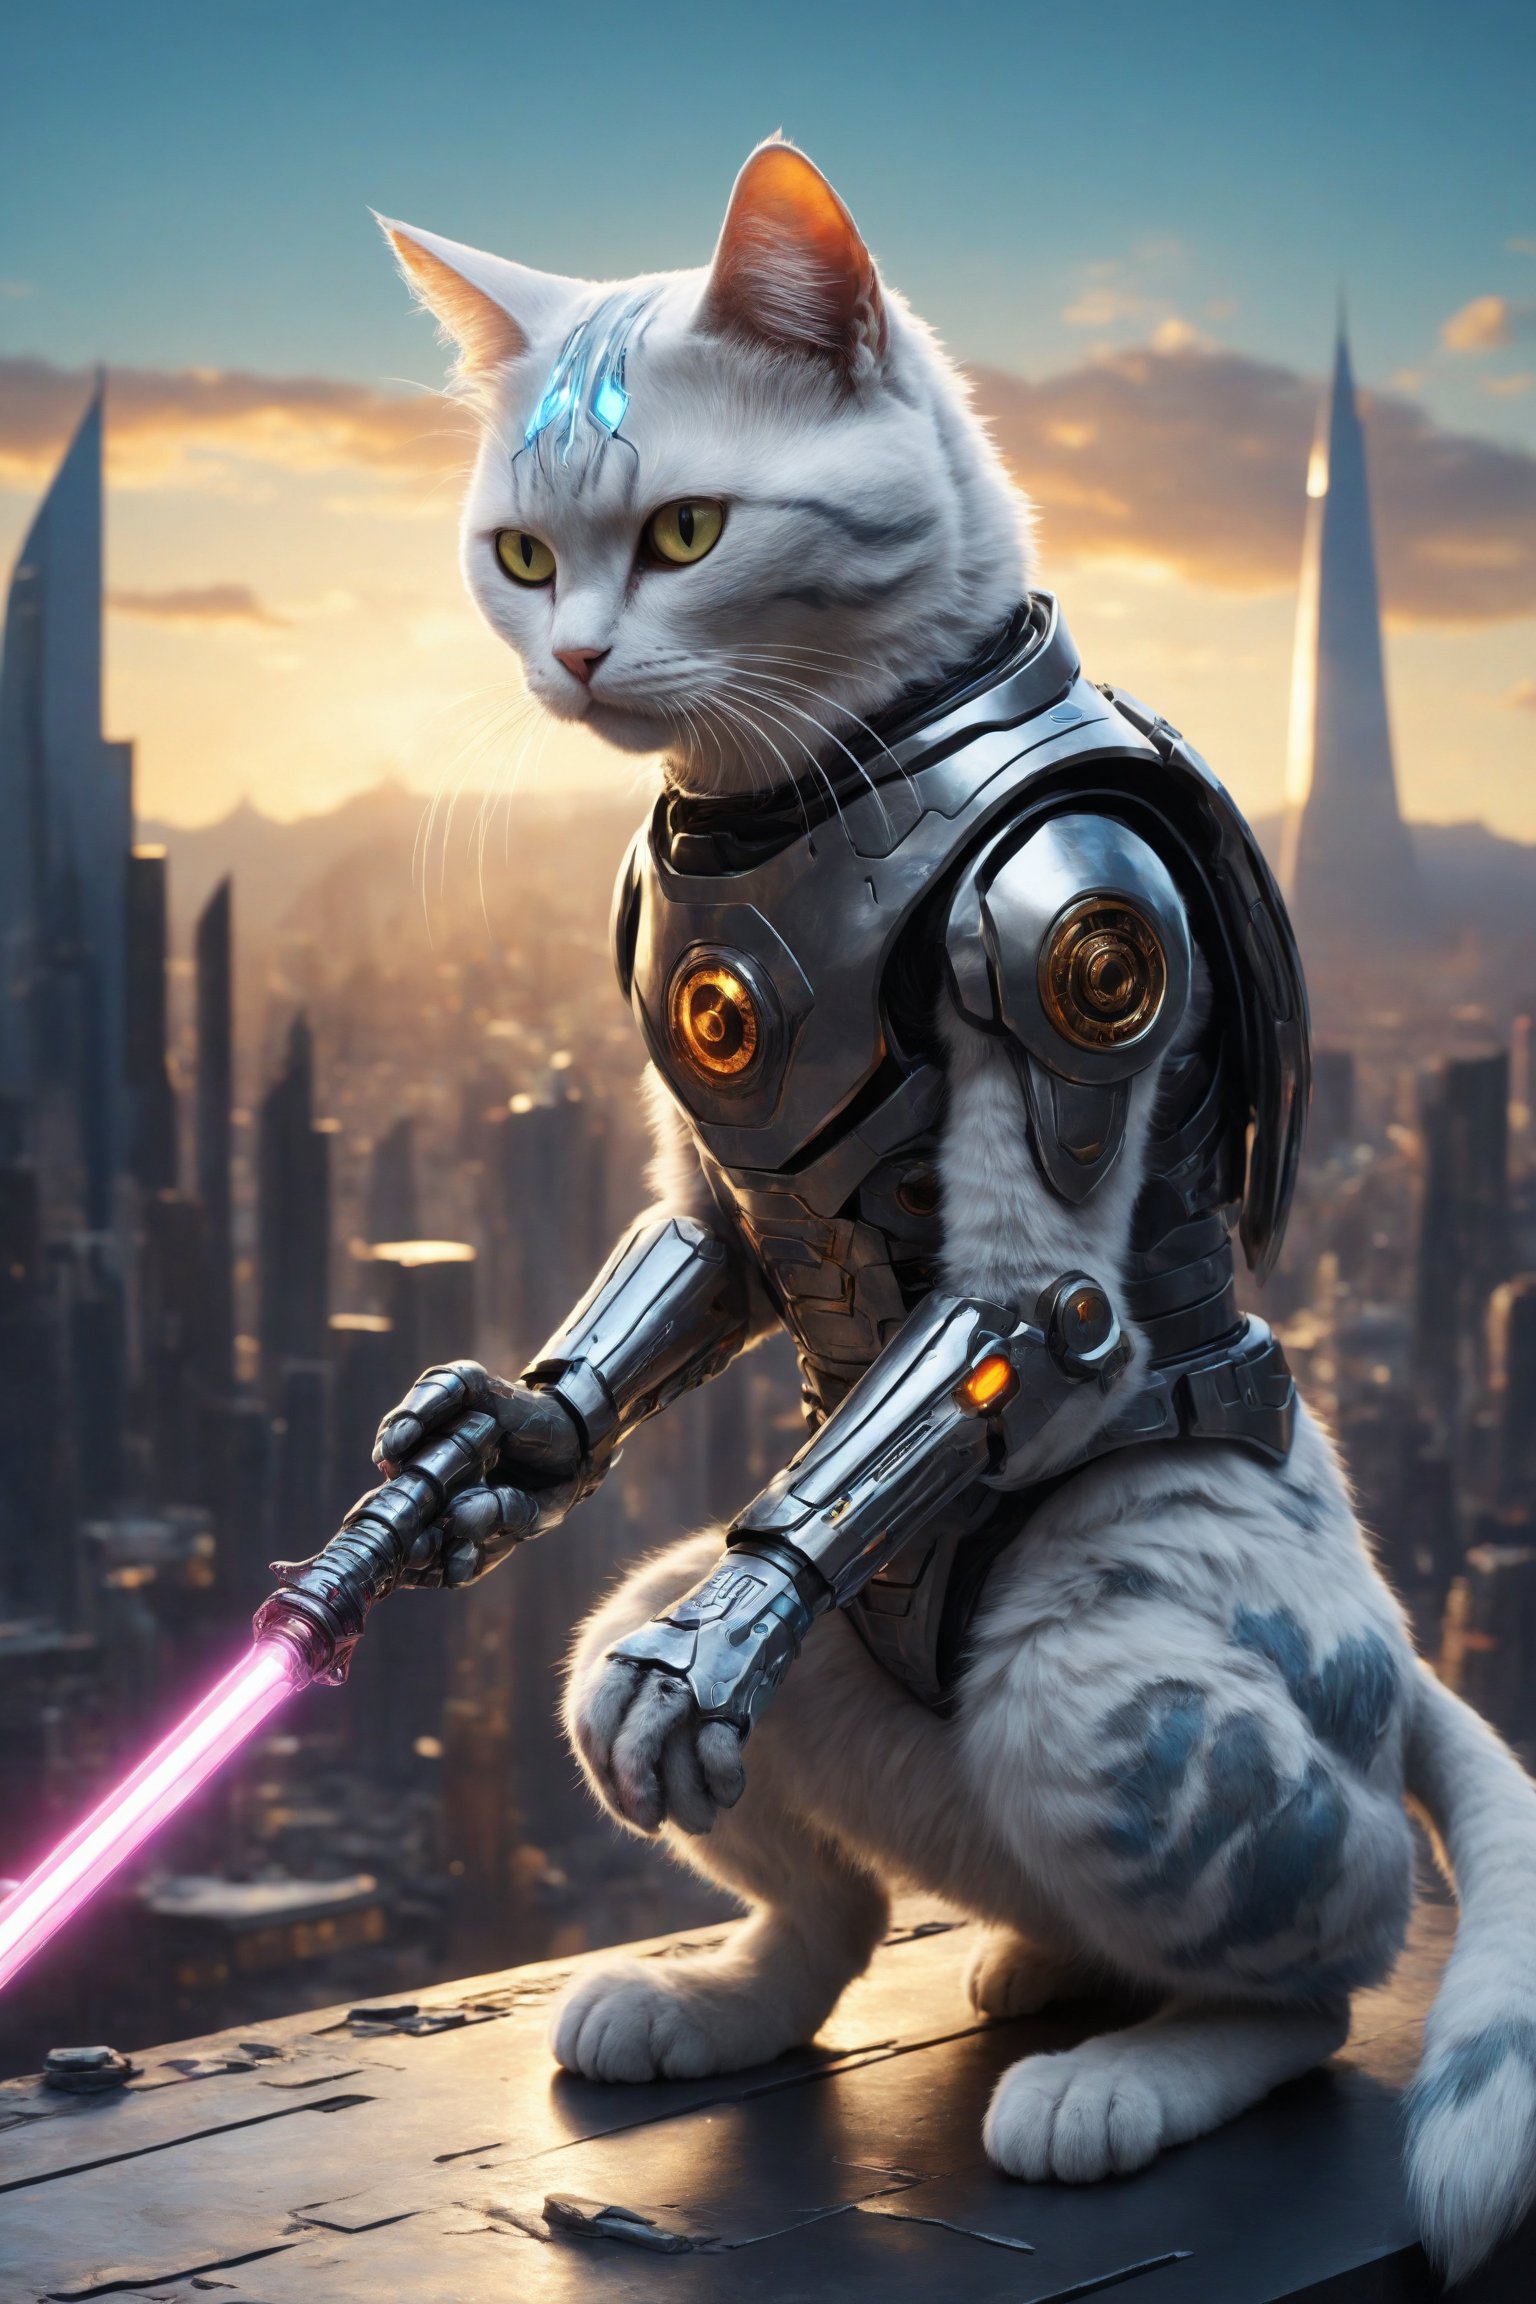 A cyborg cat polishes its metallic claws, wielding a laser sword against the skyline of a futuristic city.